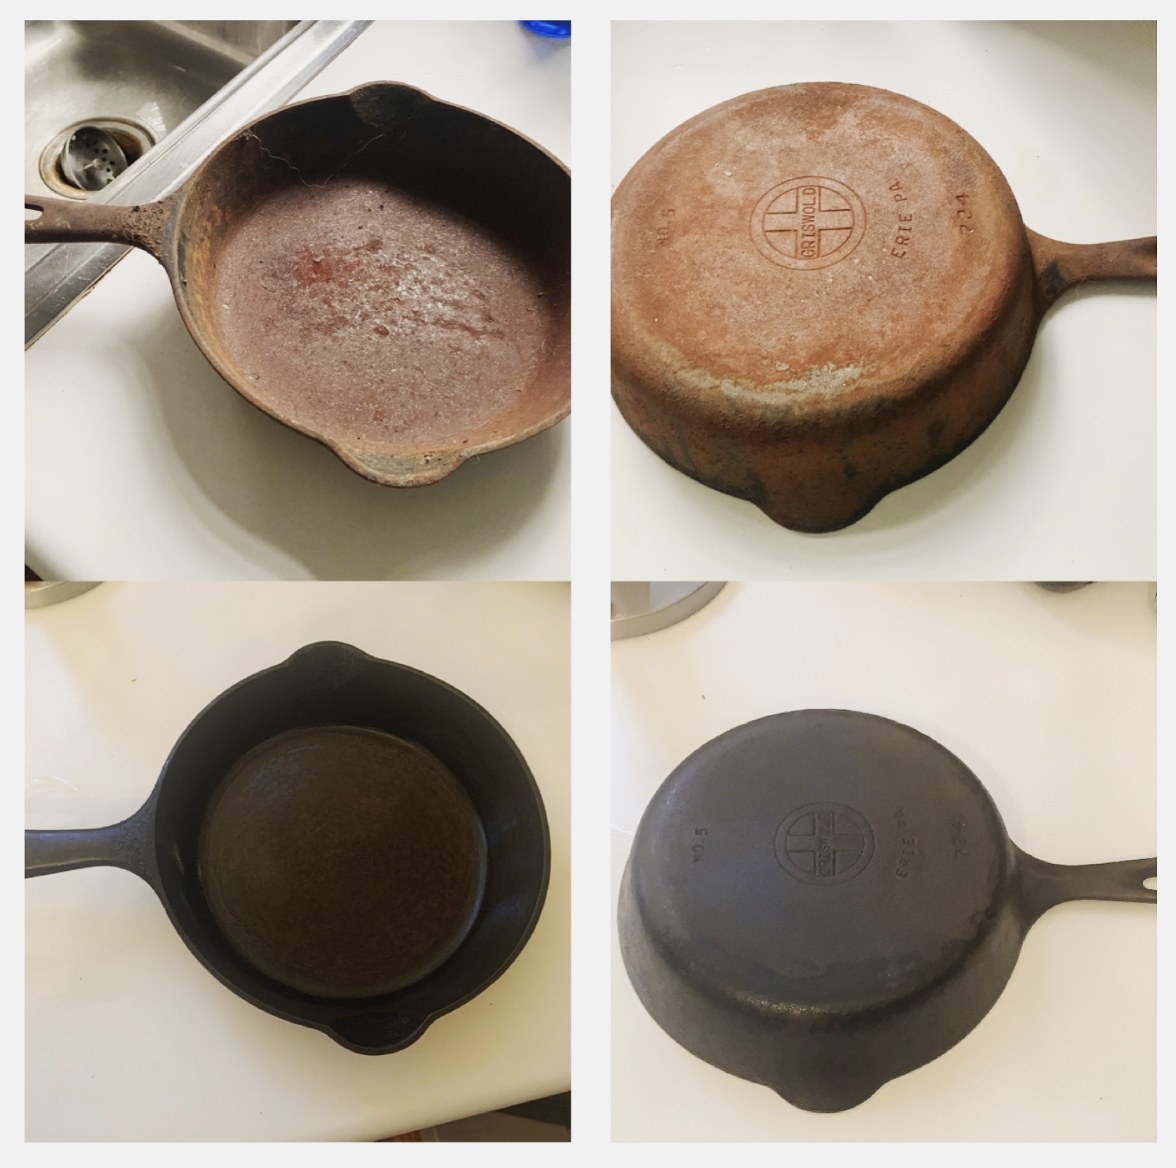 reviewer photos showing cast iron skillet completely restored and looking new after using the chainmail scrubber